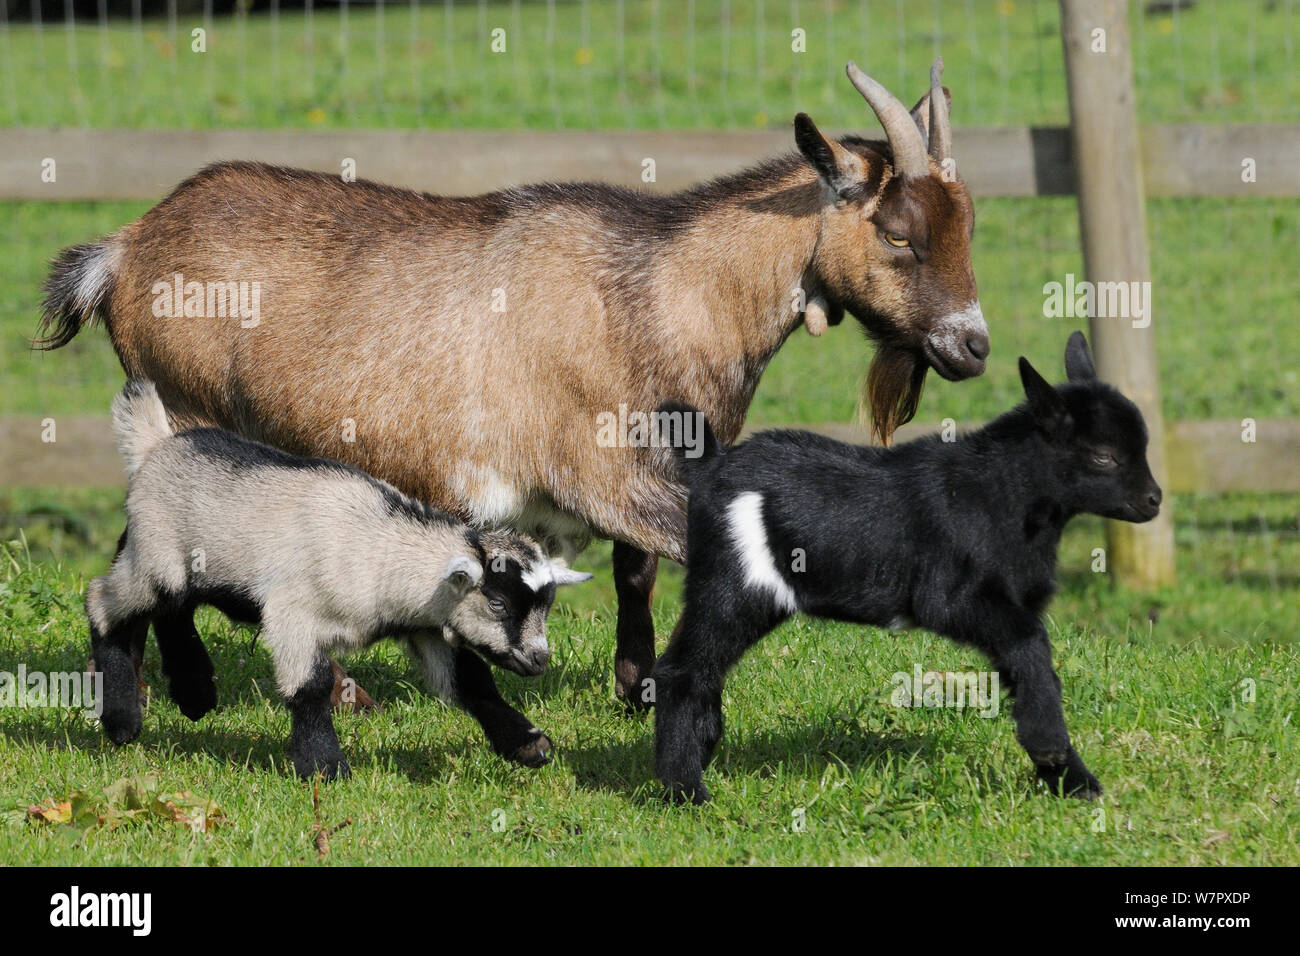 Mother Pygmy goat (Capra hircus) walking with her two young kids running alongside in a fenced paddock, Wiltshire, UK, September. Stock Photo